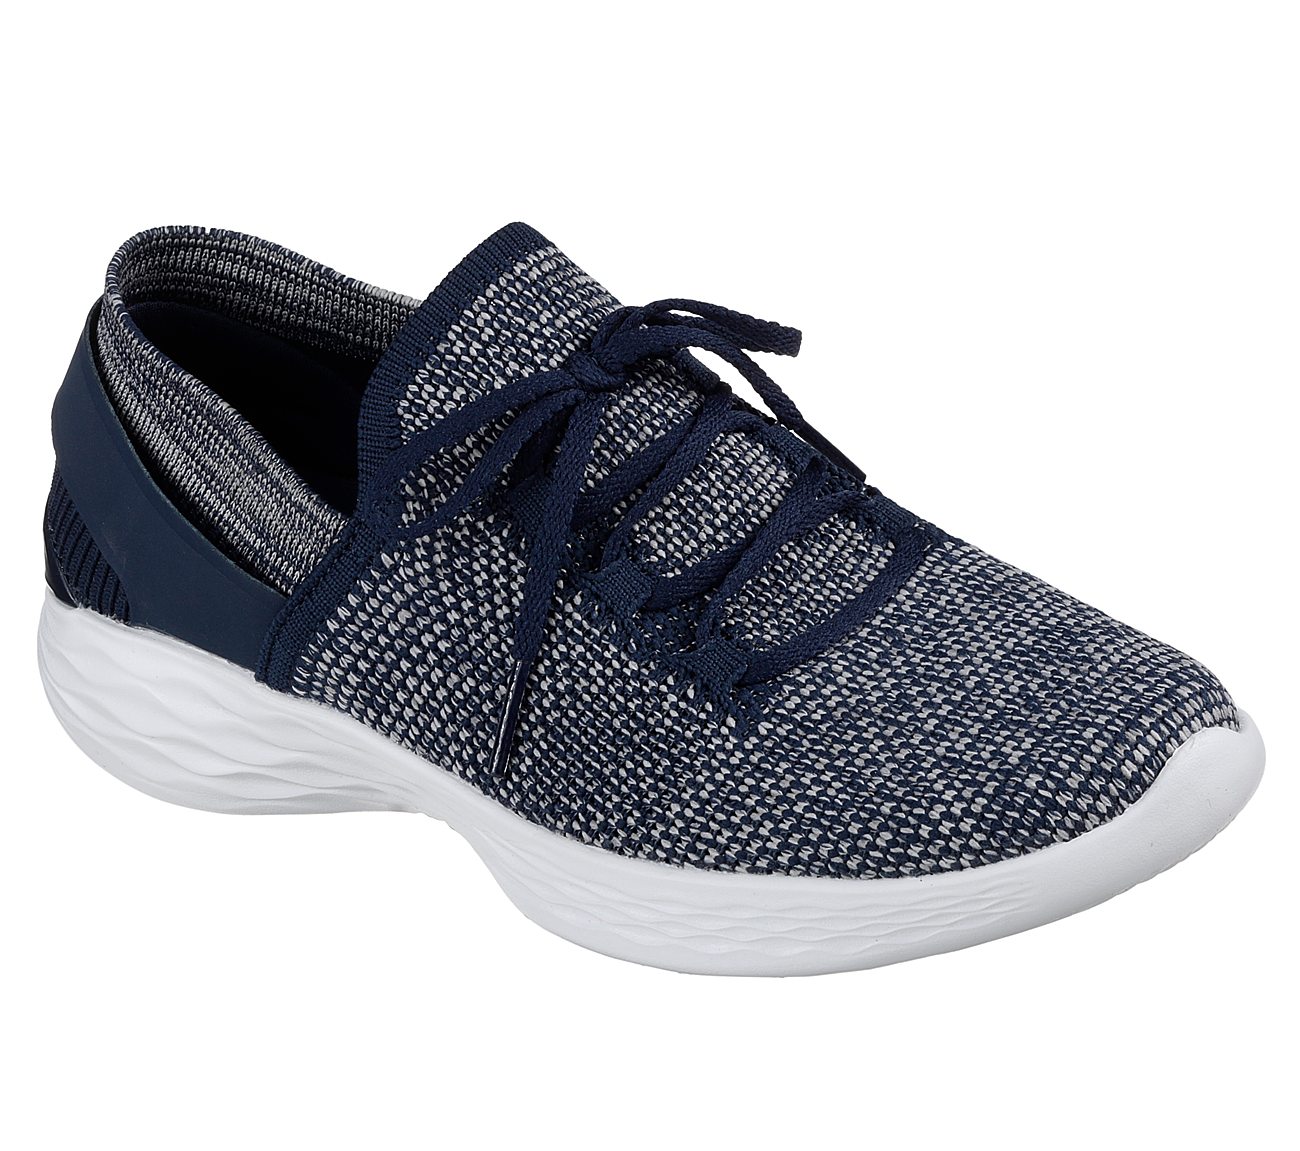 skechers you inspire review 